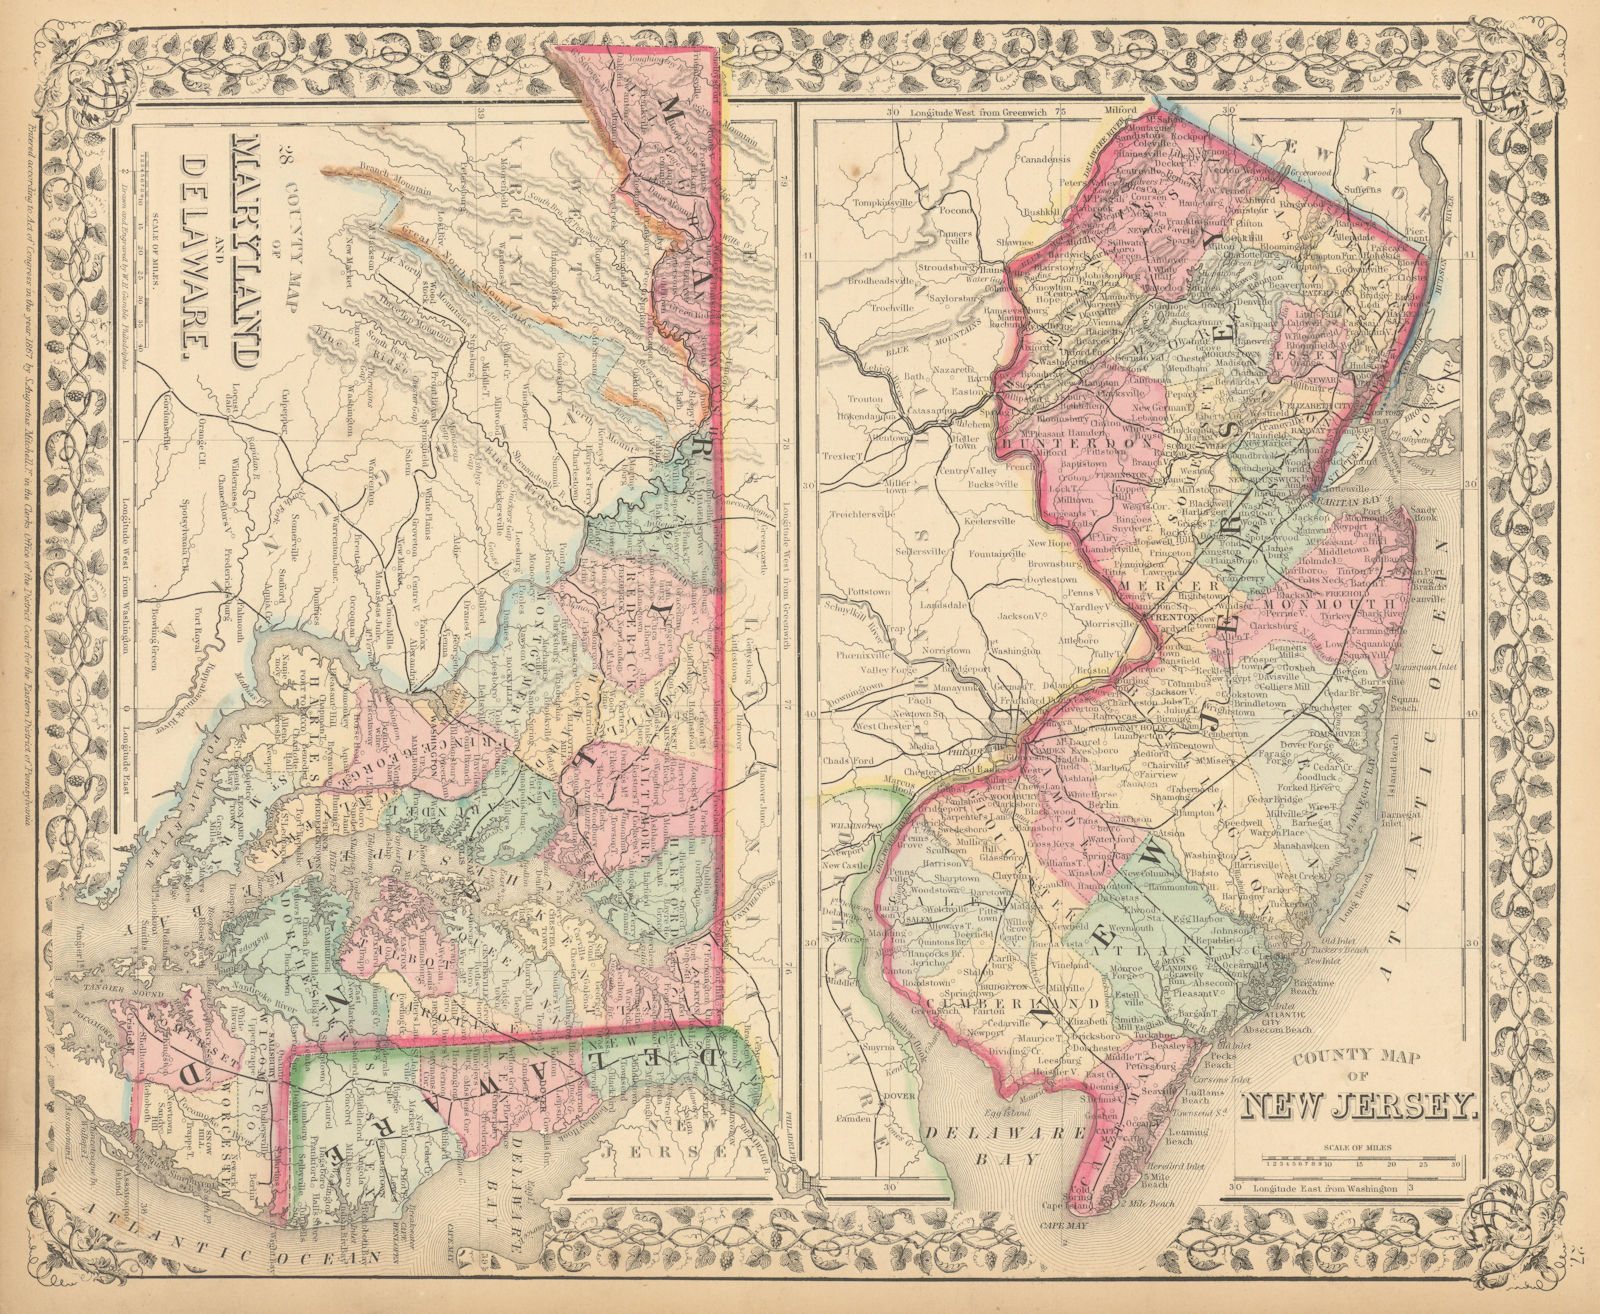 County maps of New Jersey, Maryland & Delaware. State maps. MITCHELL 1869